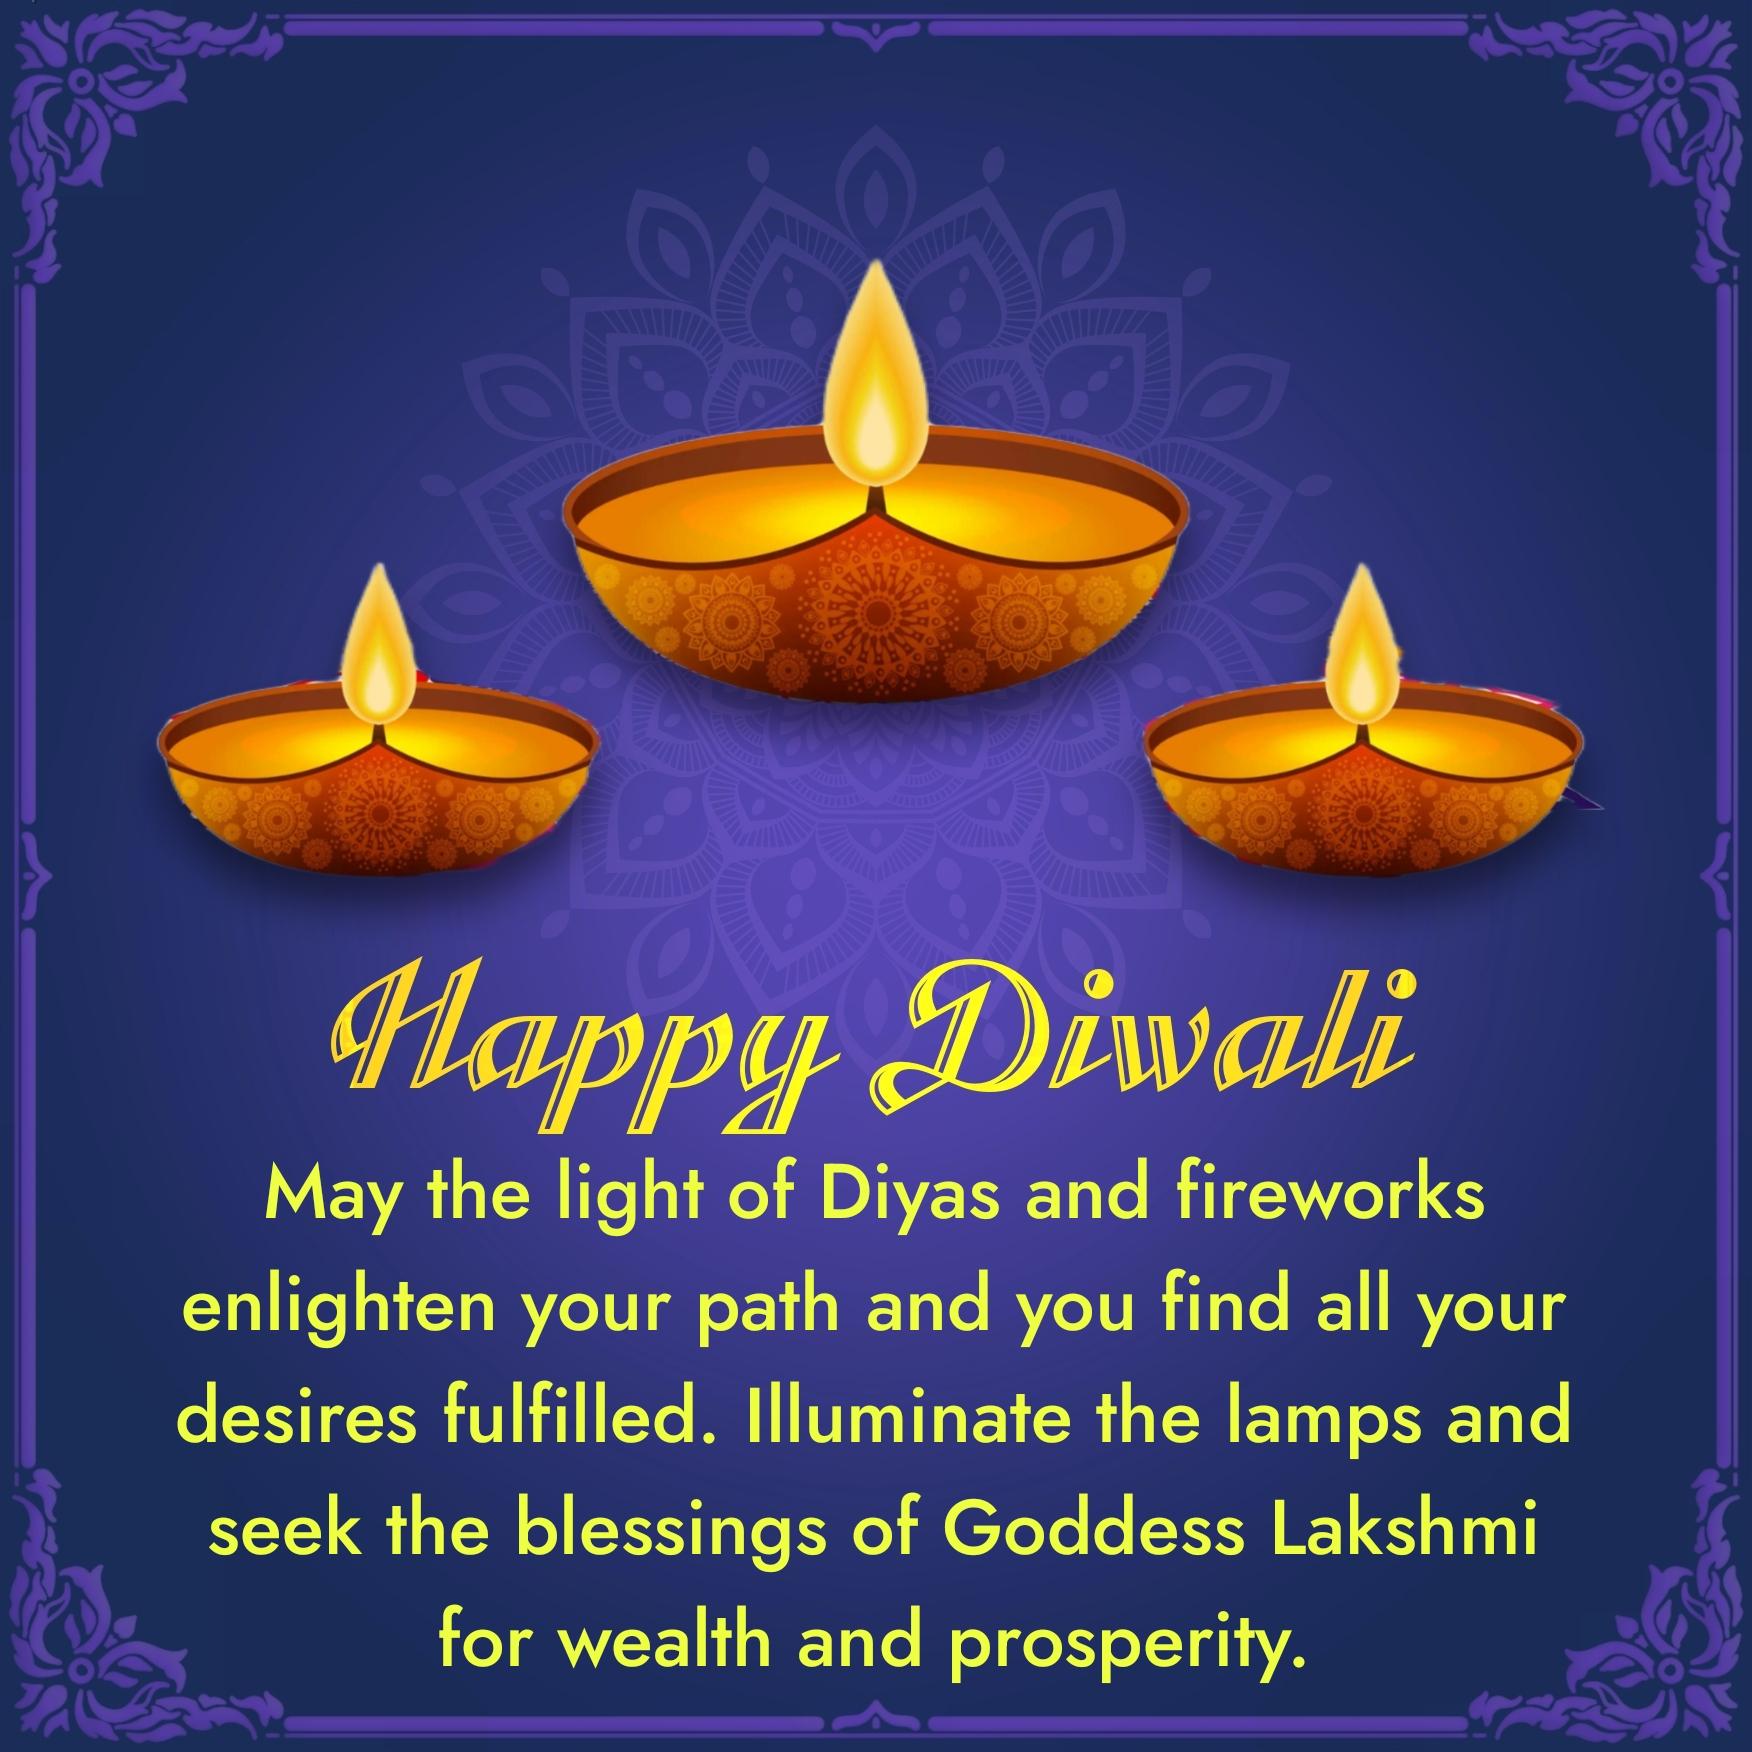 May the light of Diyas and fireworks enlighten your path